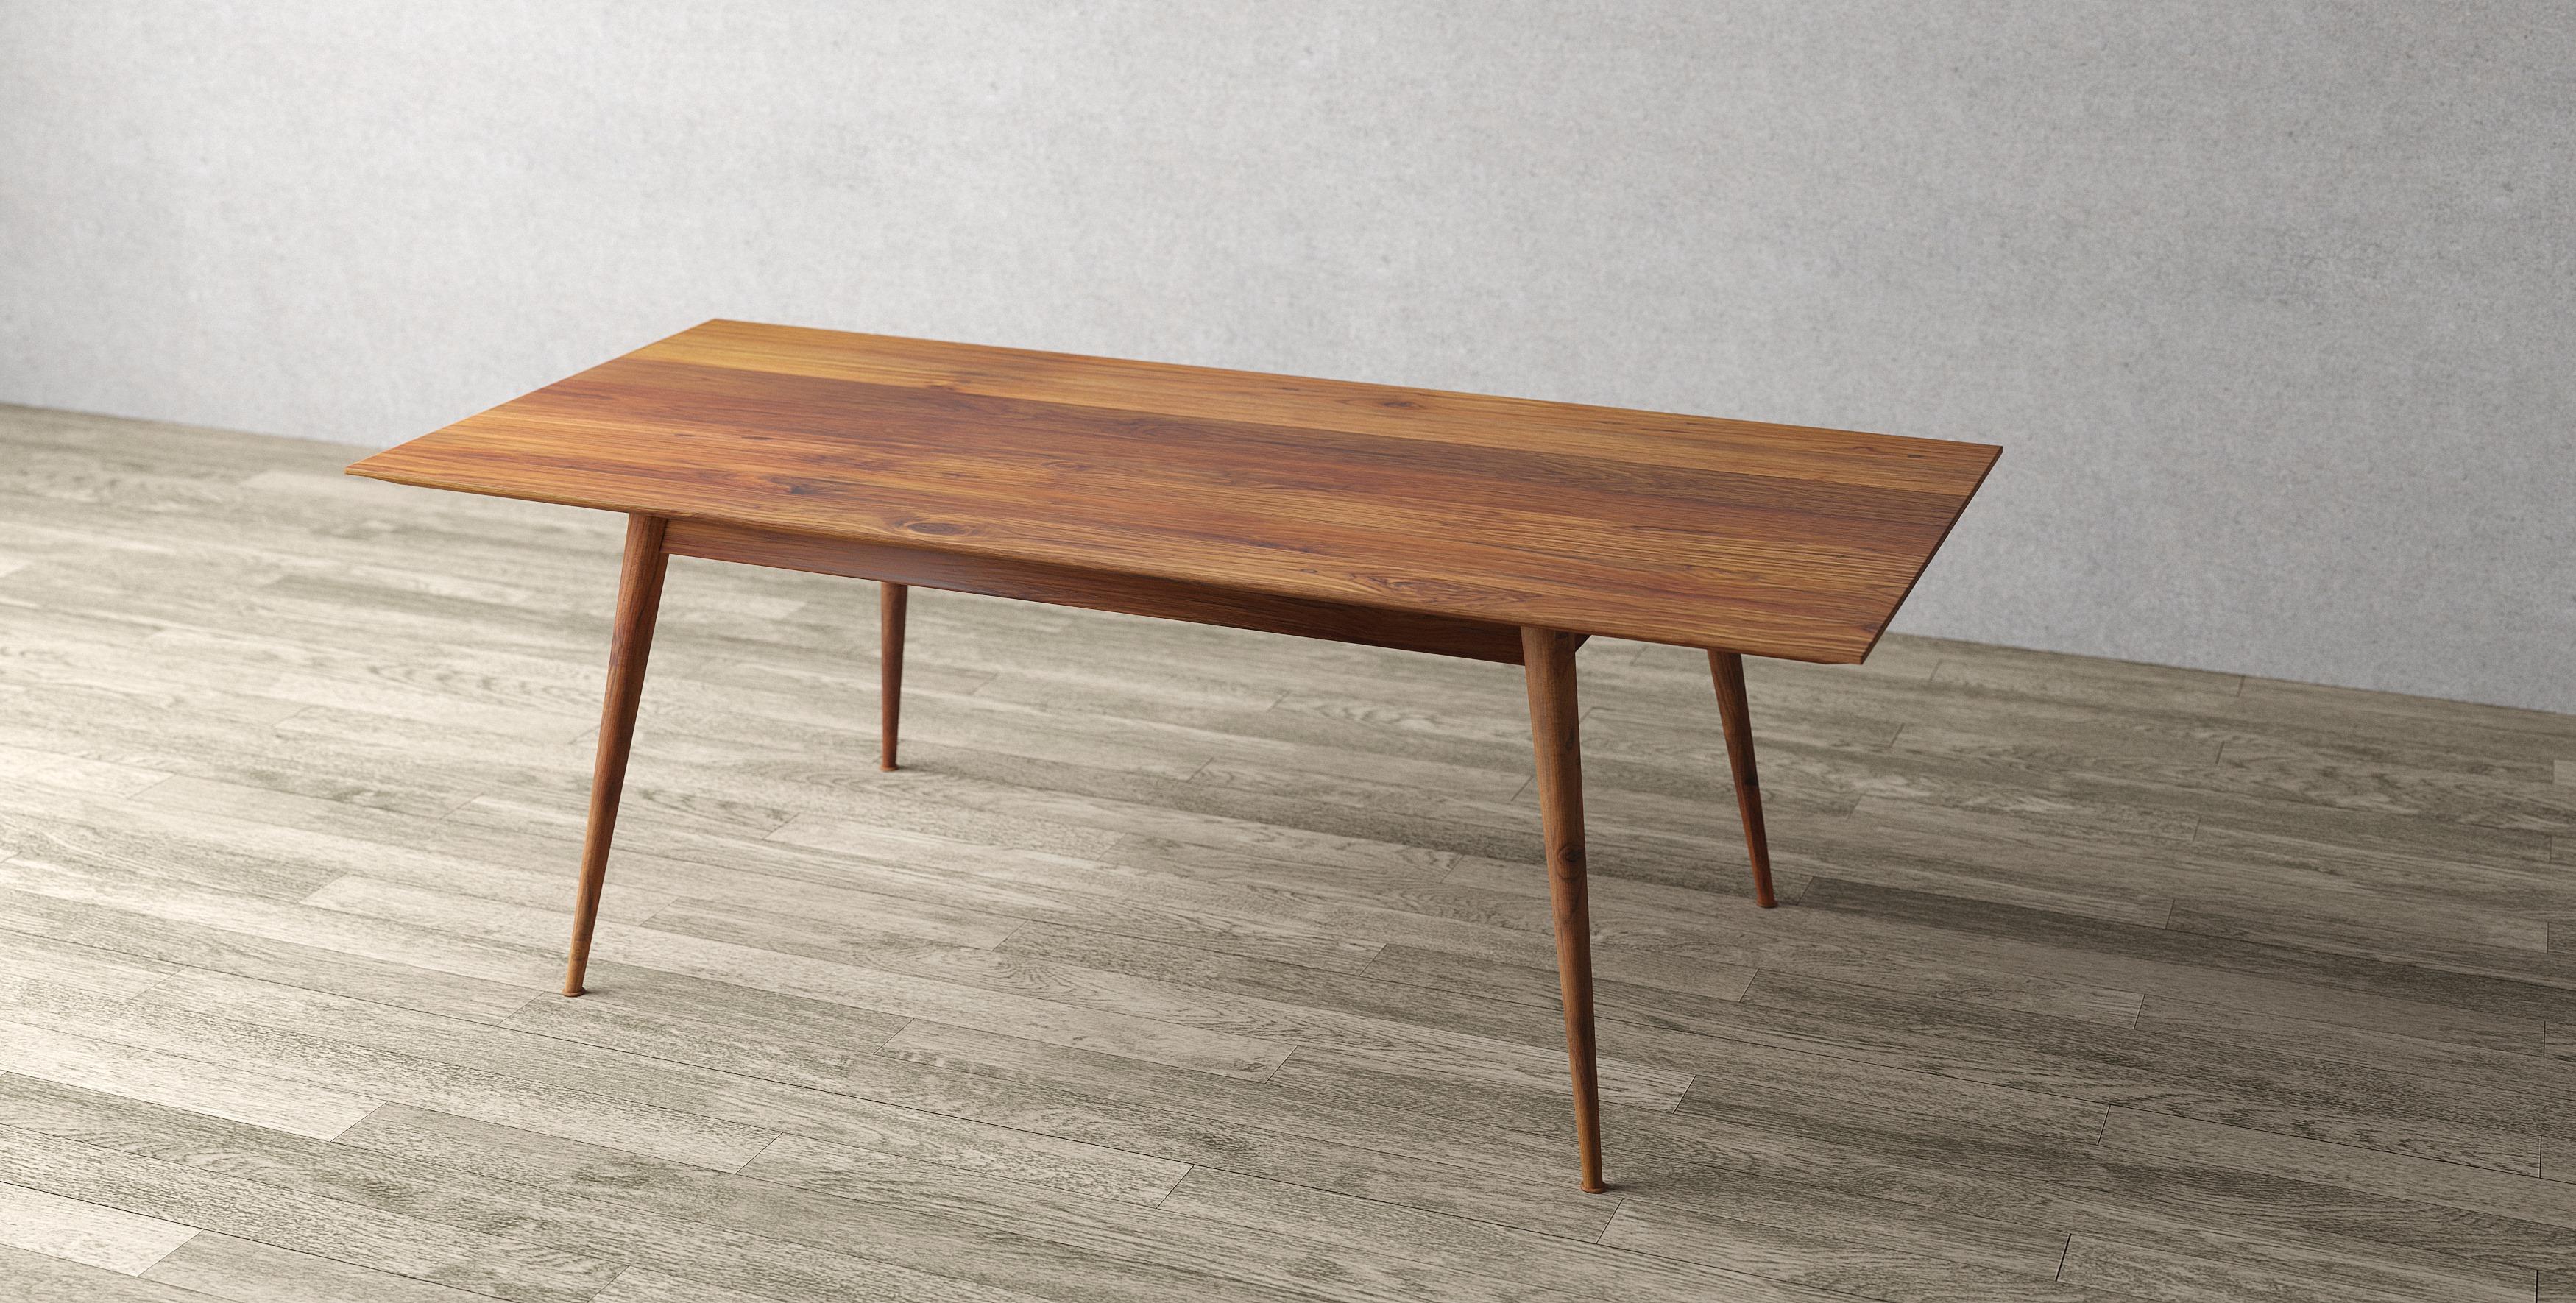 This table celebrates the natural beauty of solid wood with straightforward Mid-Century Modern styling. The simplicity of the design and subtle details make this a stunning addition to any home providing beauty that will last for decades.

The Table